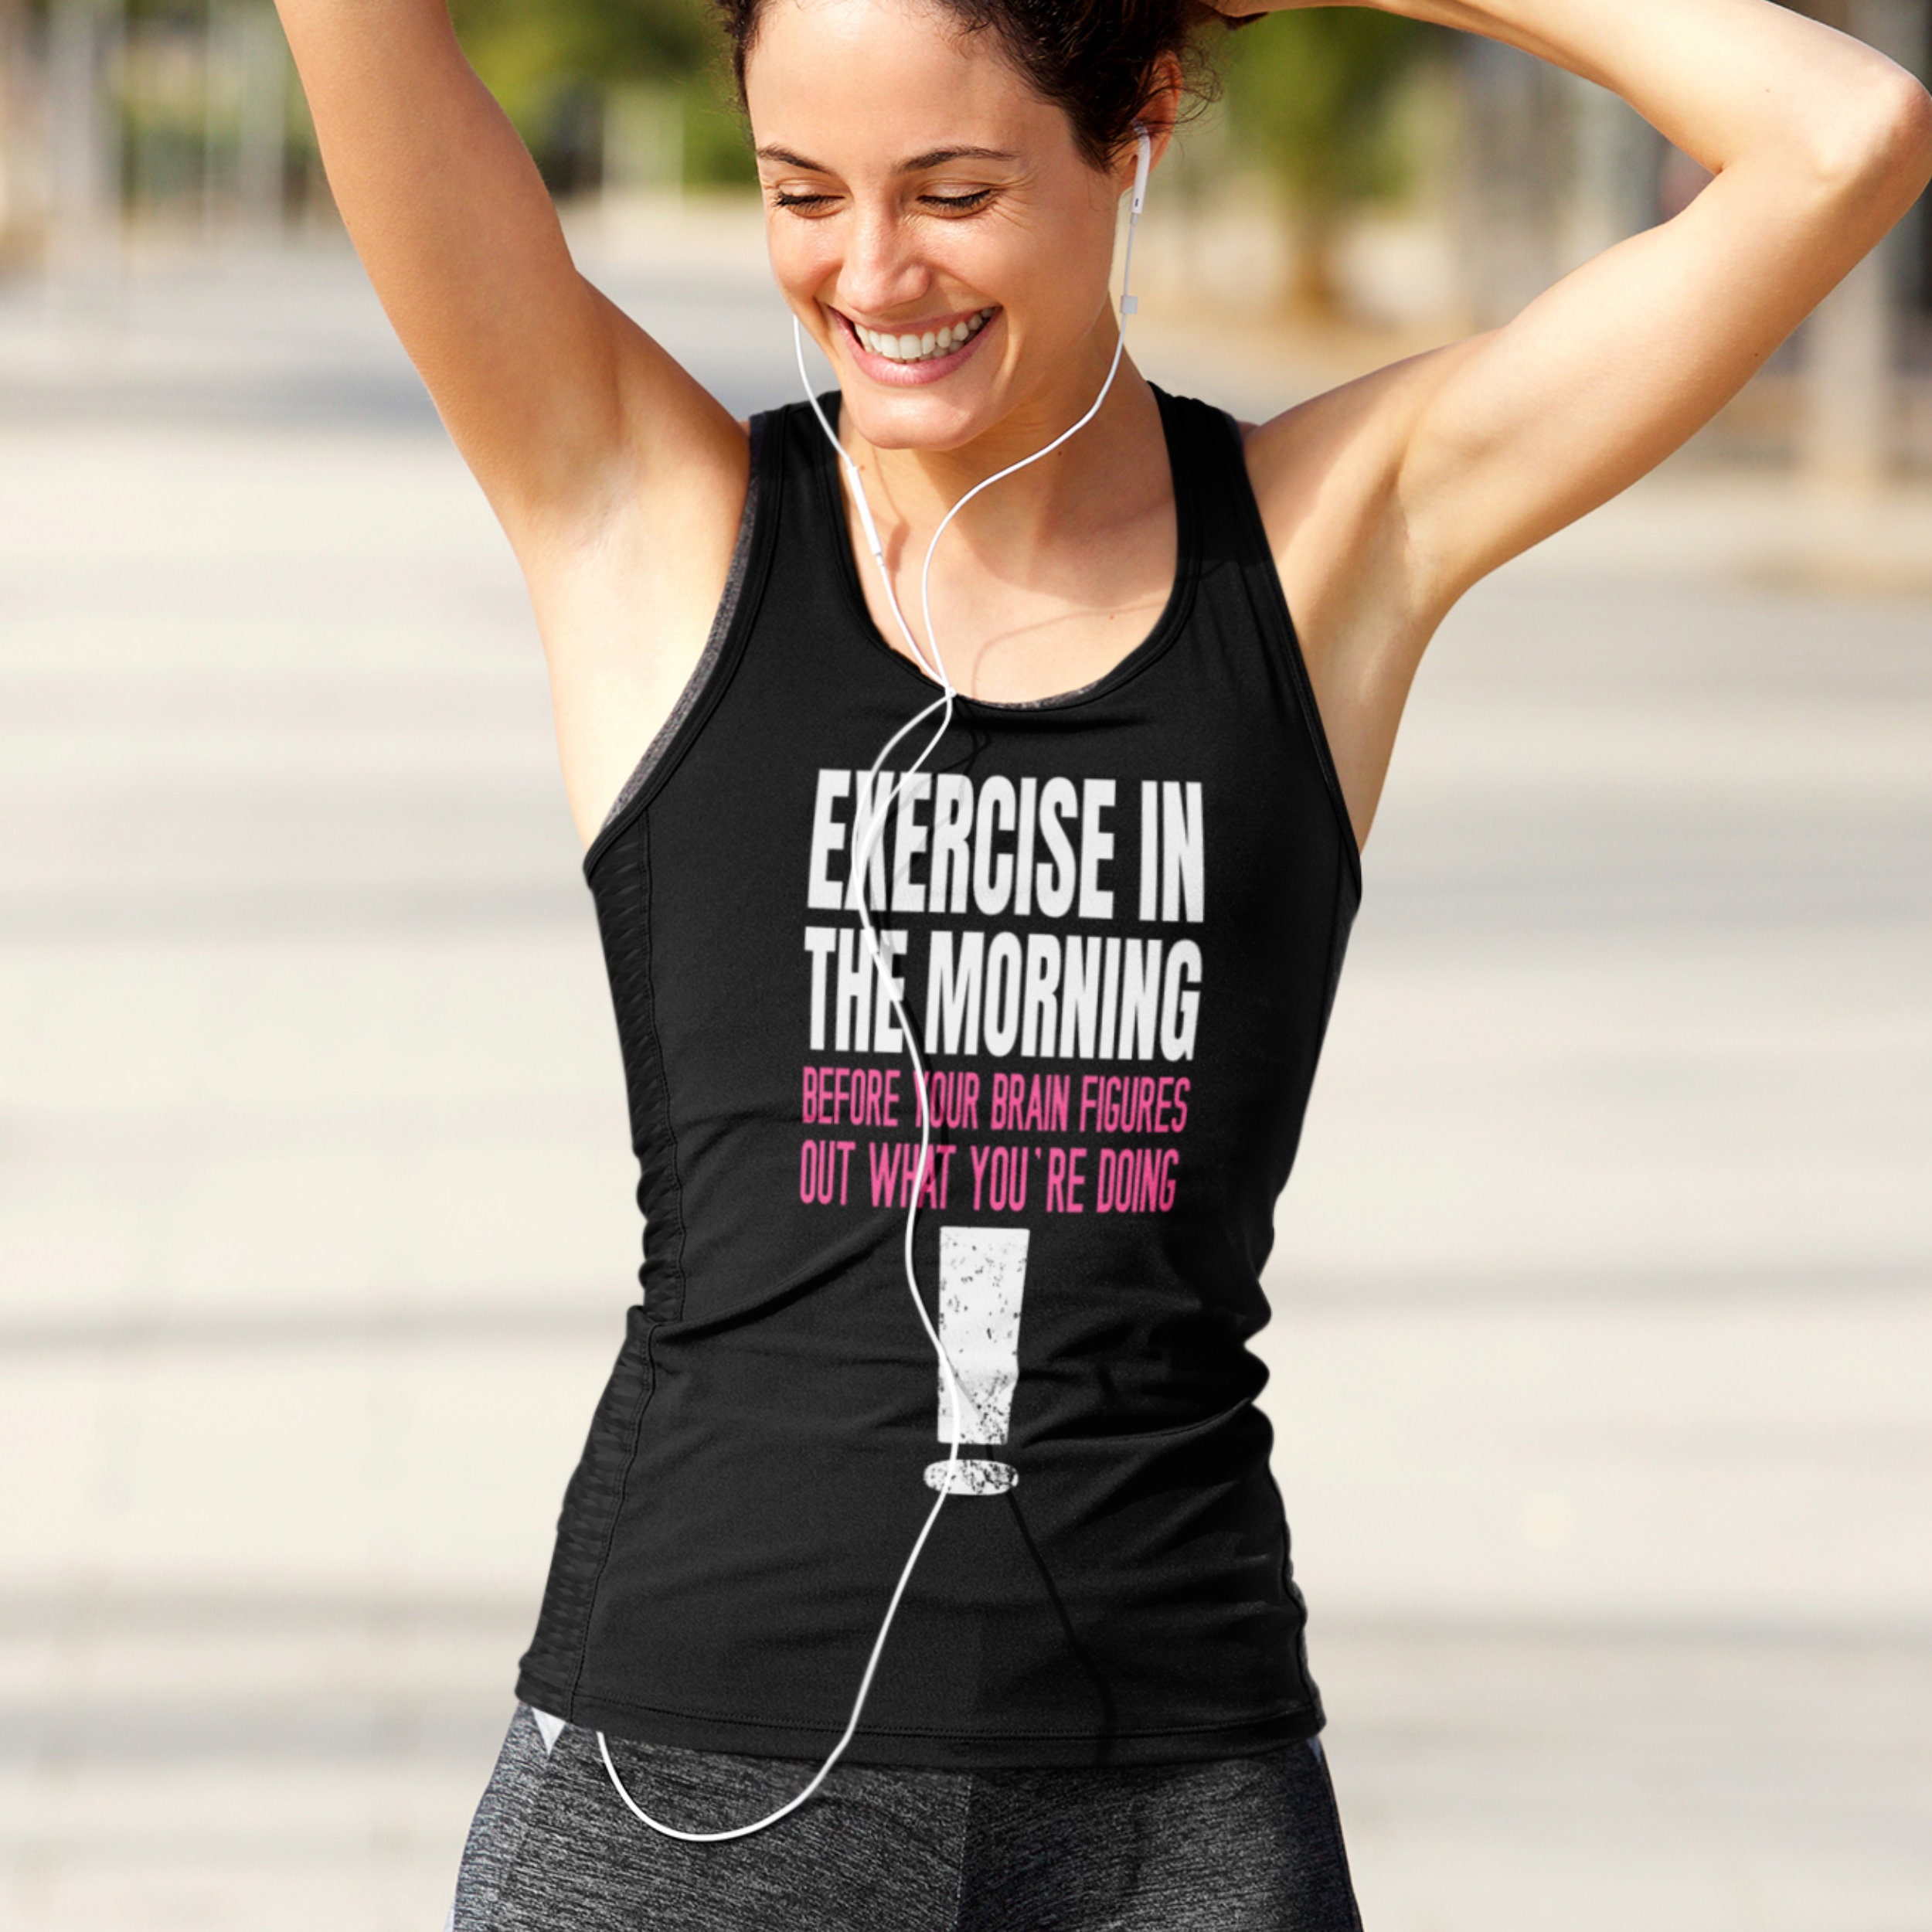 Funny Workout Tanks for Ladies, Fitness Shirt for Women, Workout Shirts, Exercise  Shirt, Gift for Women -  Canada